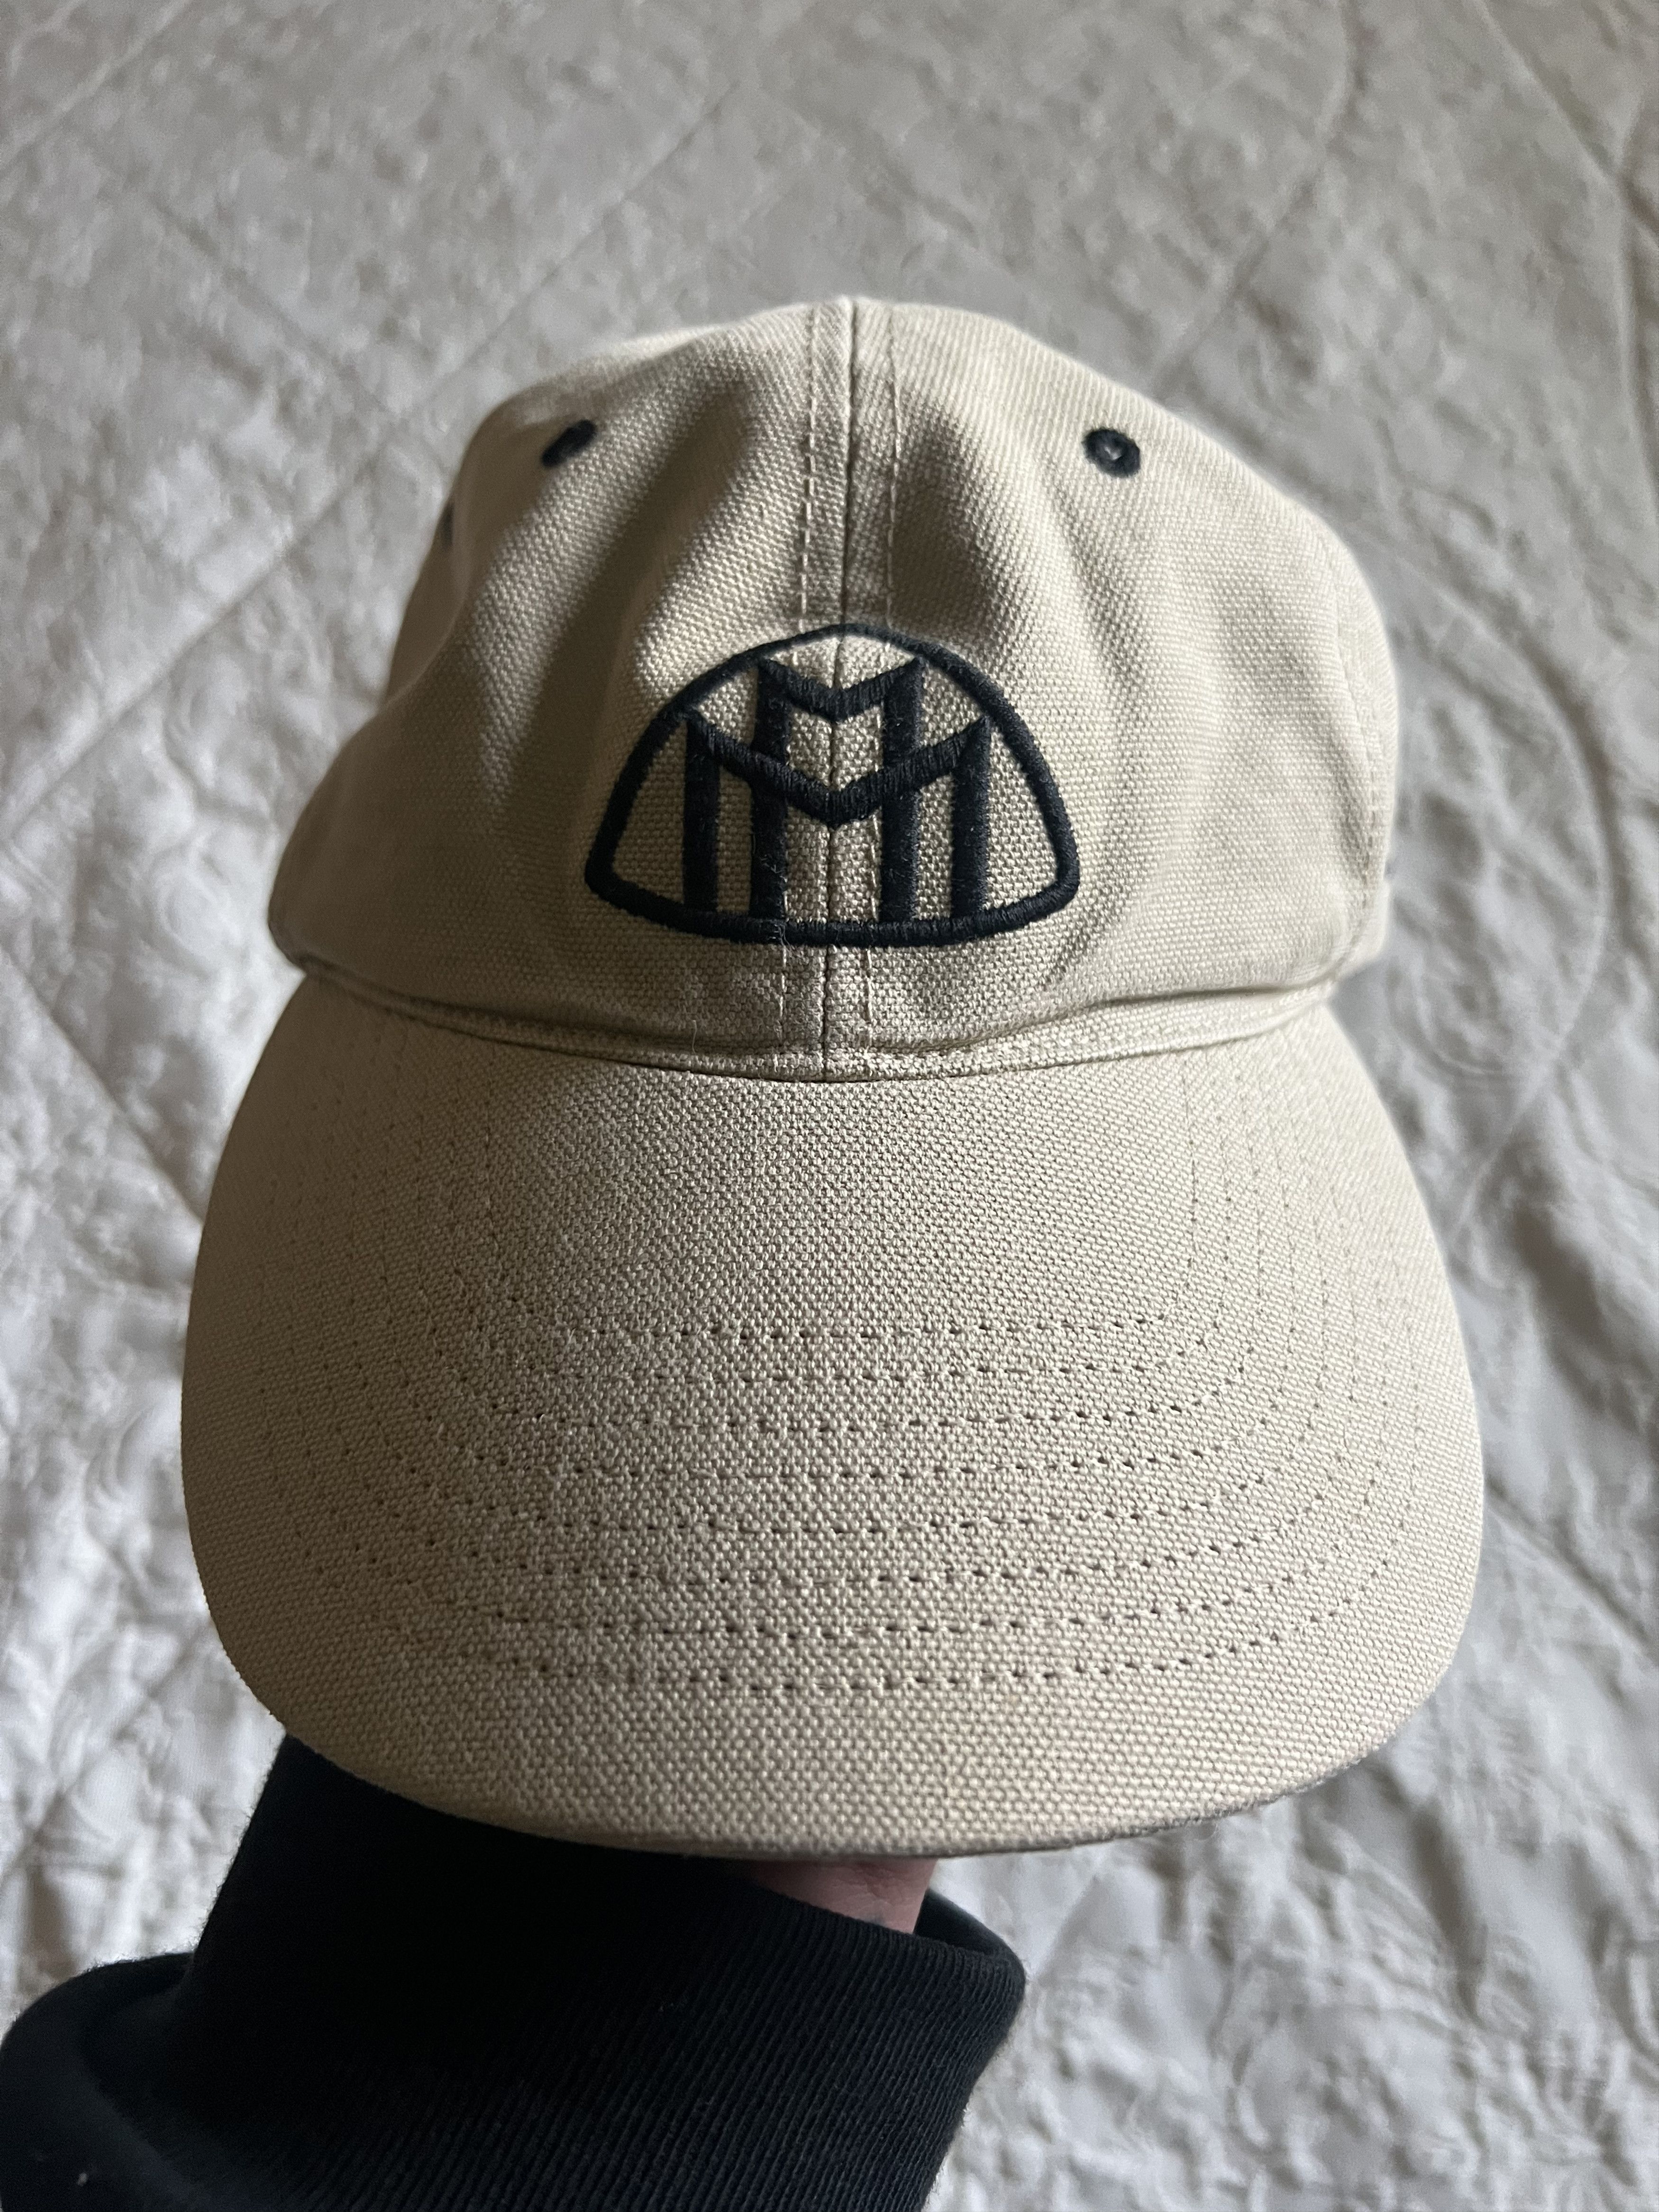 Off-White OFF white Mercedes Benz Maybach Cap | Grailed